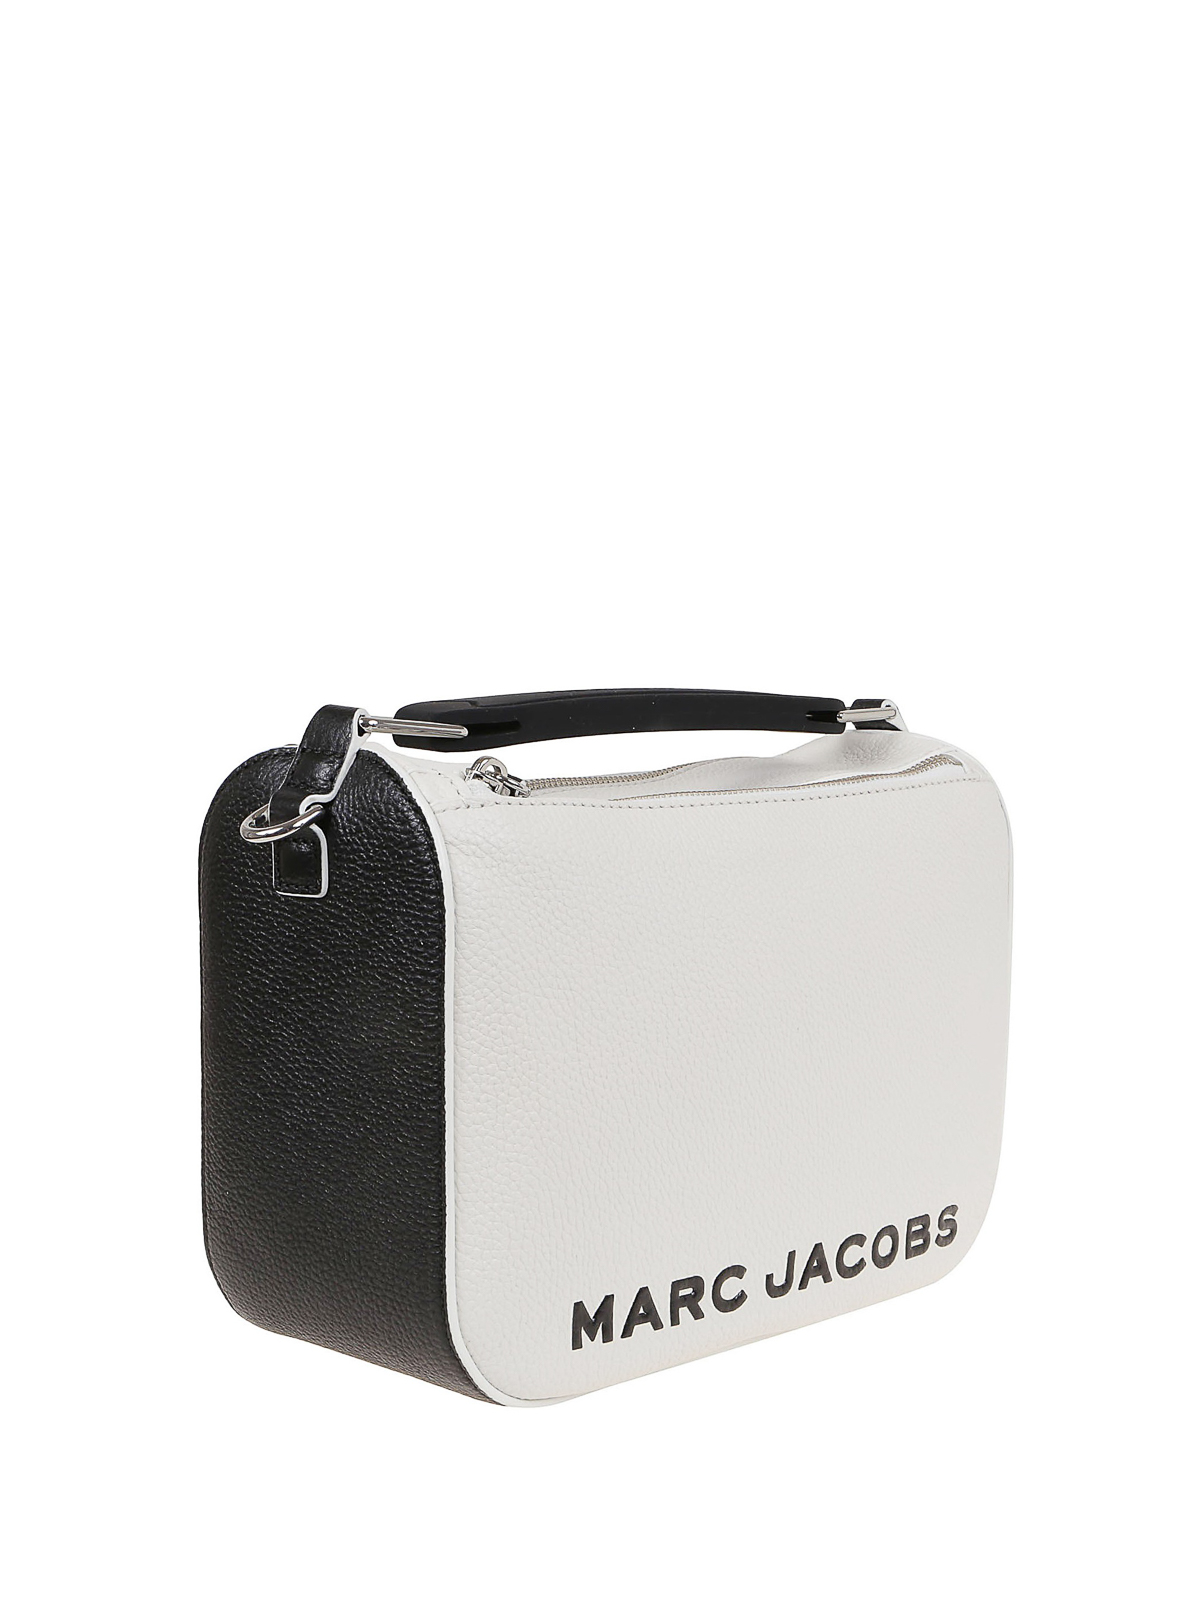 Clutches Marc Jacobs - The Soft Box 23 clutch - M0017089164